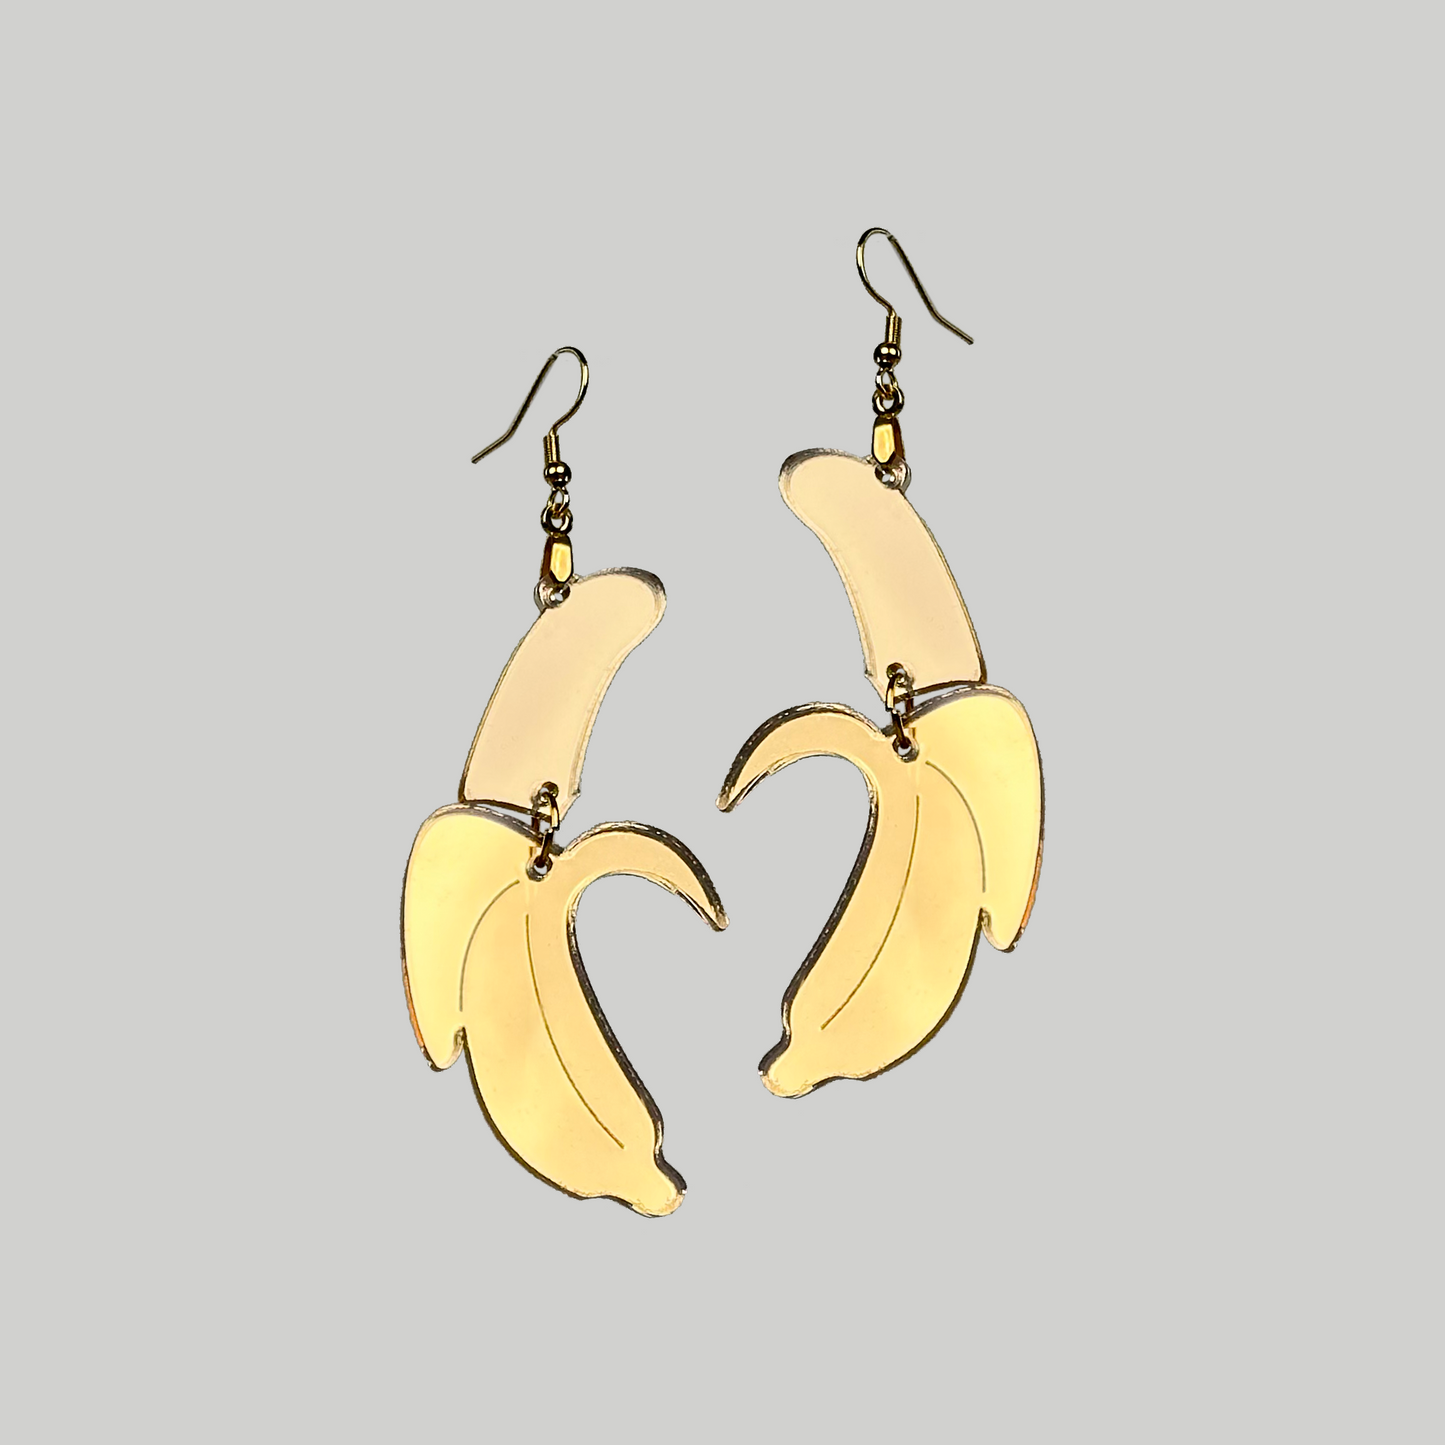 Banana Earrings: Playful and tropical, these banana-shaped earrings add a touch of fun to your accessory collection.